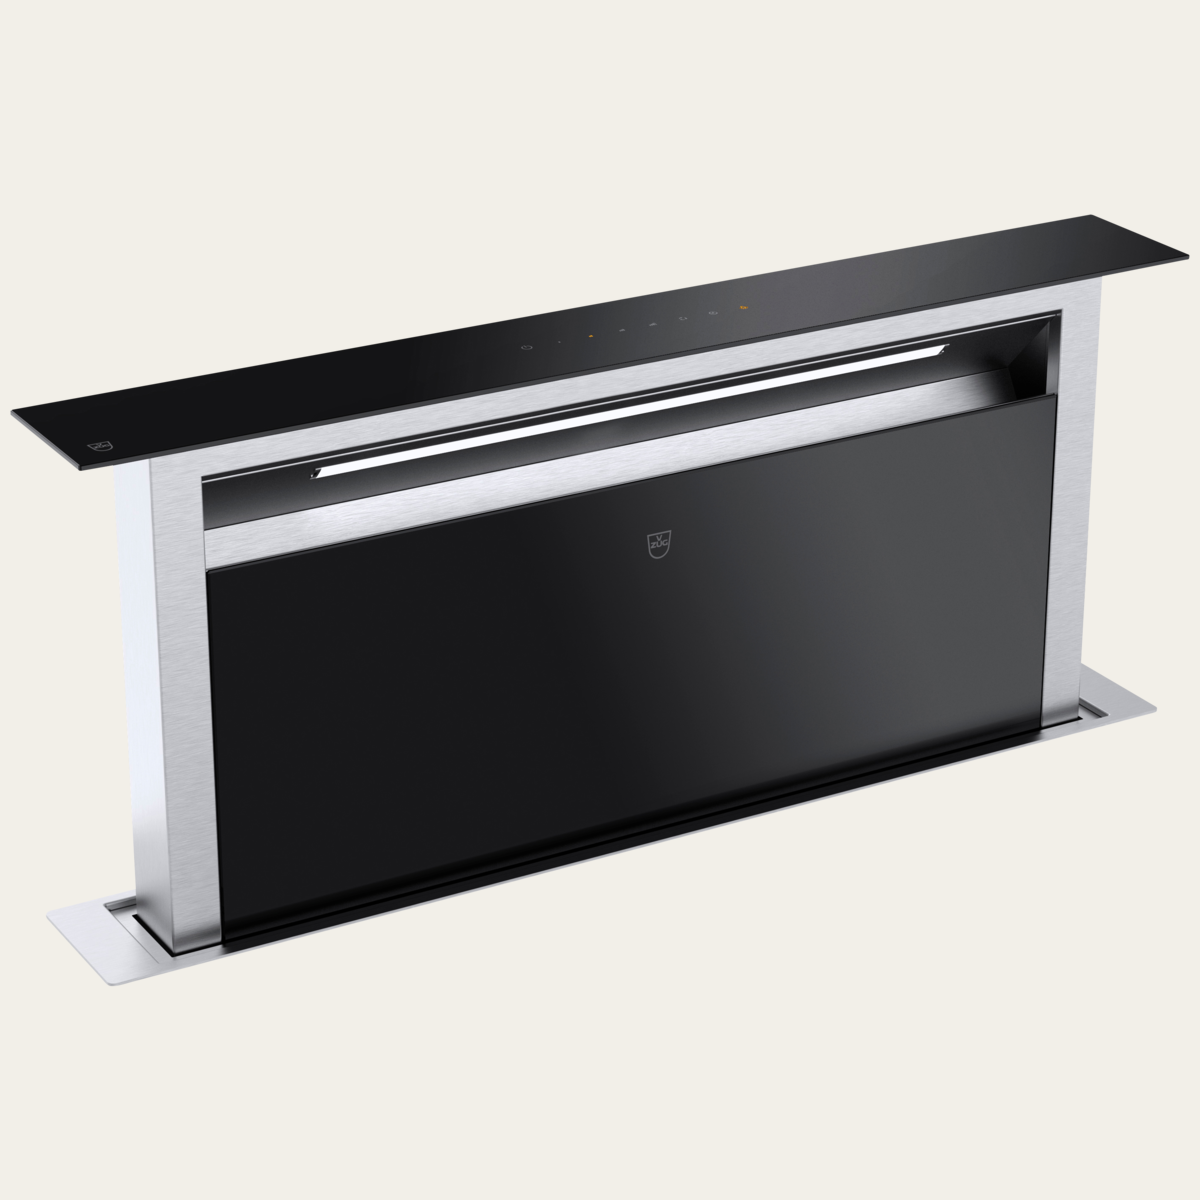 V-ZUG DSTS9 downdraft hood, width 90 cm,extracted air, glass design